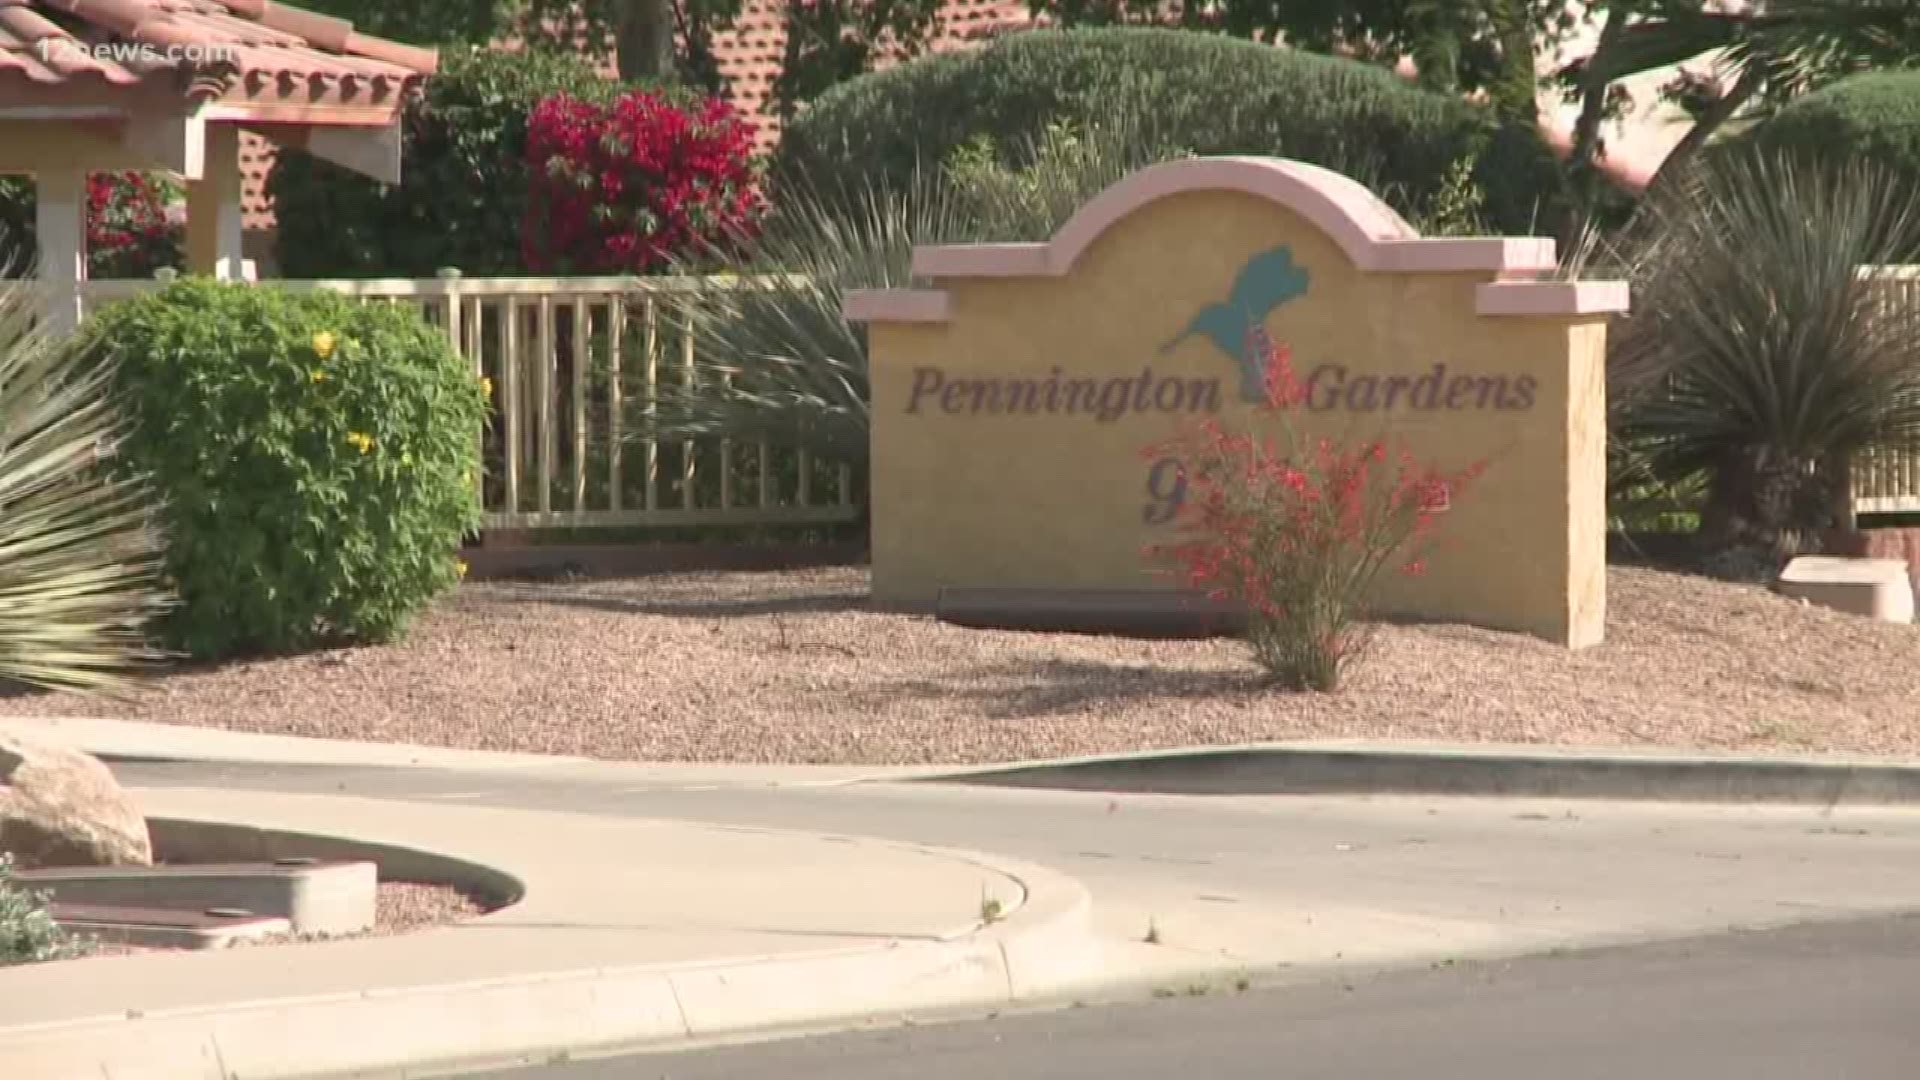 Pennington Gardens said 13 of their residents died related to the coronavirus. The state isn't releasing data on other facilities.